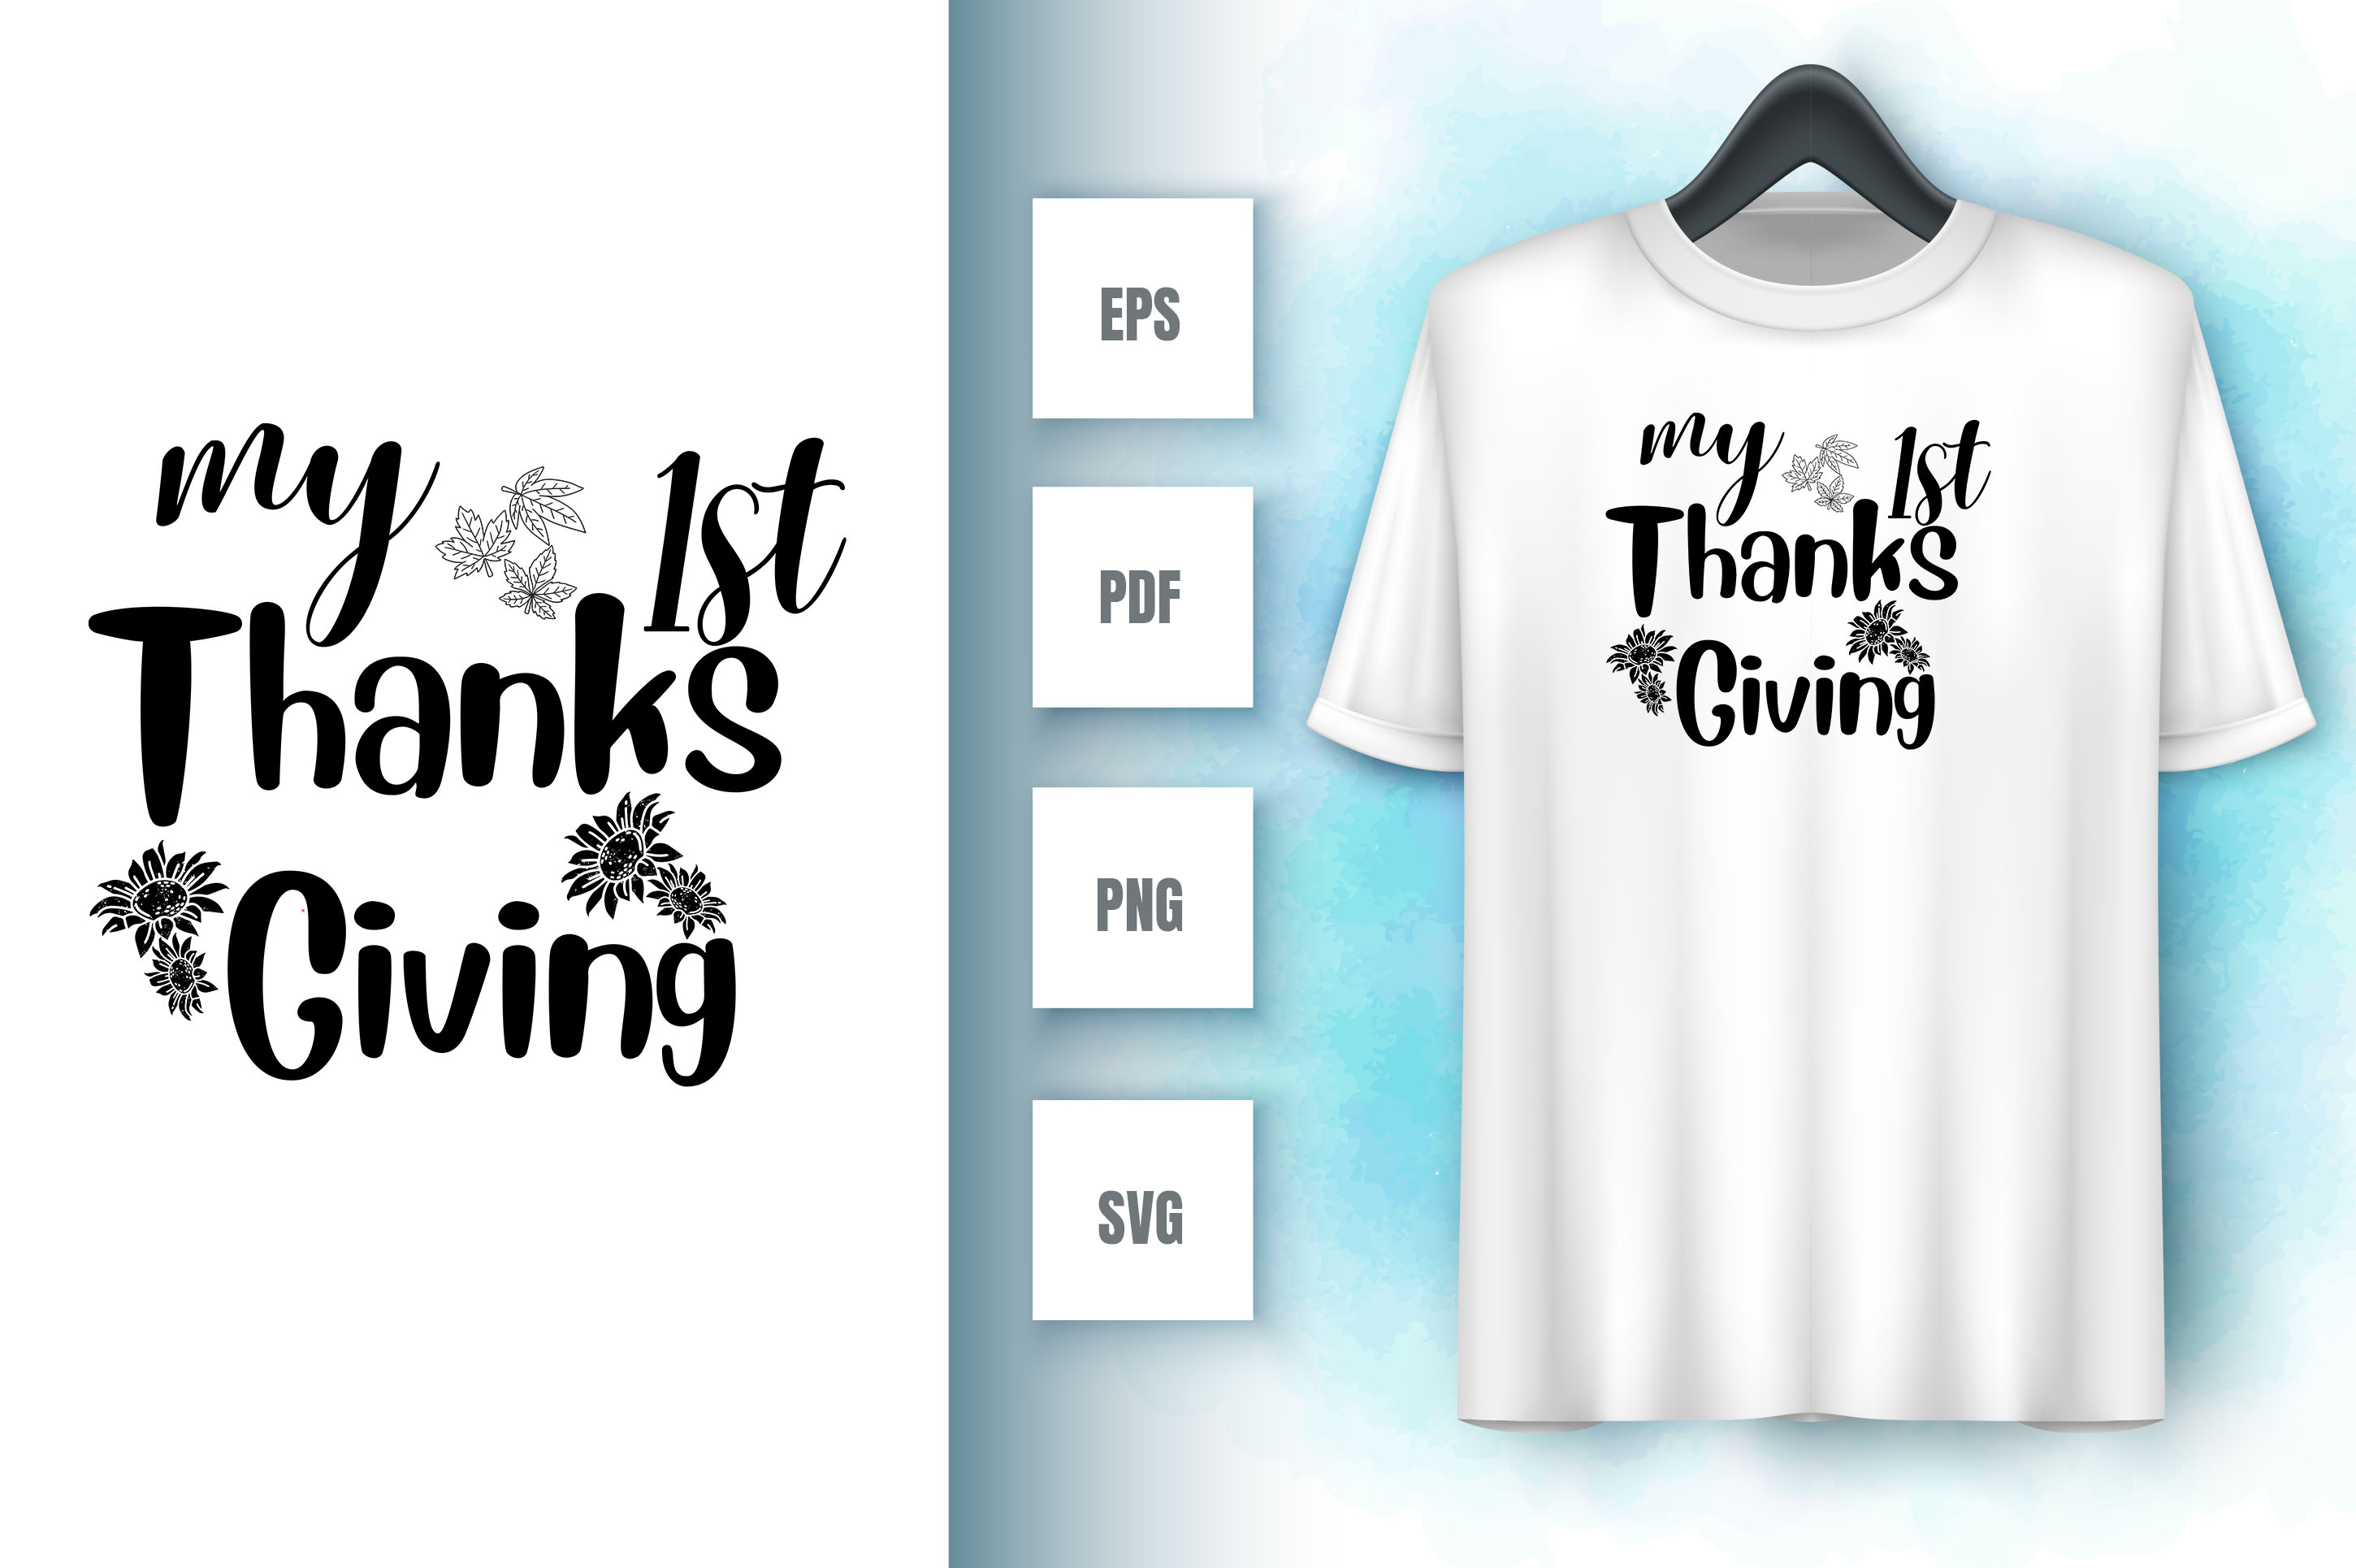 Image of a white t-shirt with an amazing slogan my 1st thanksgiving